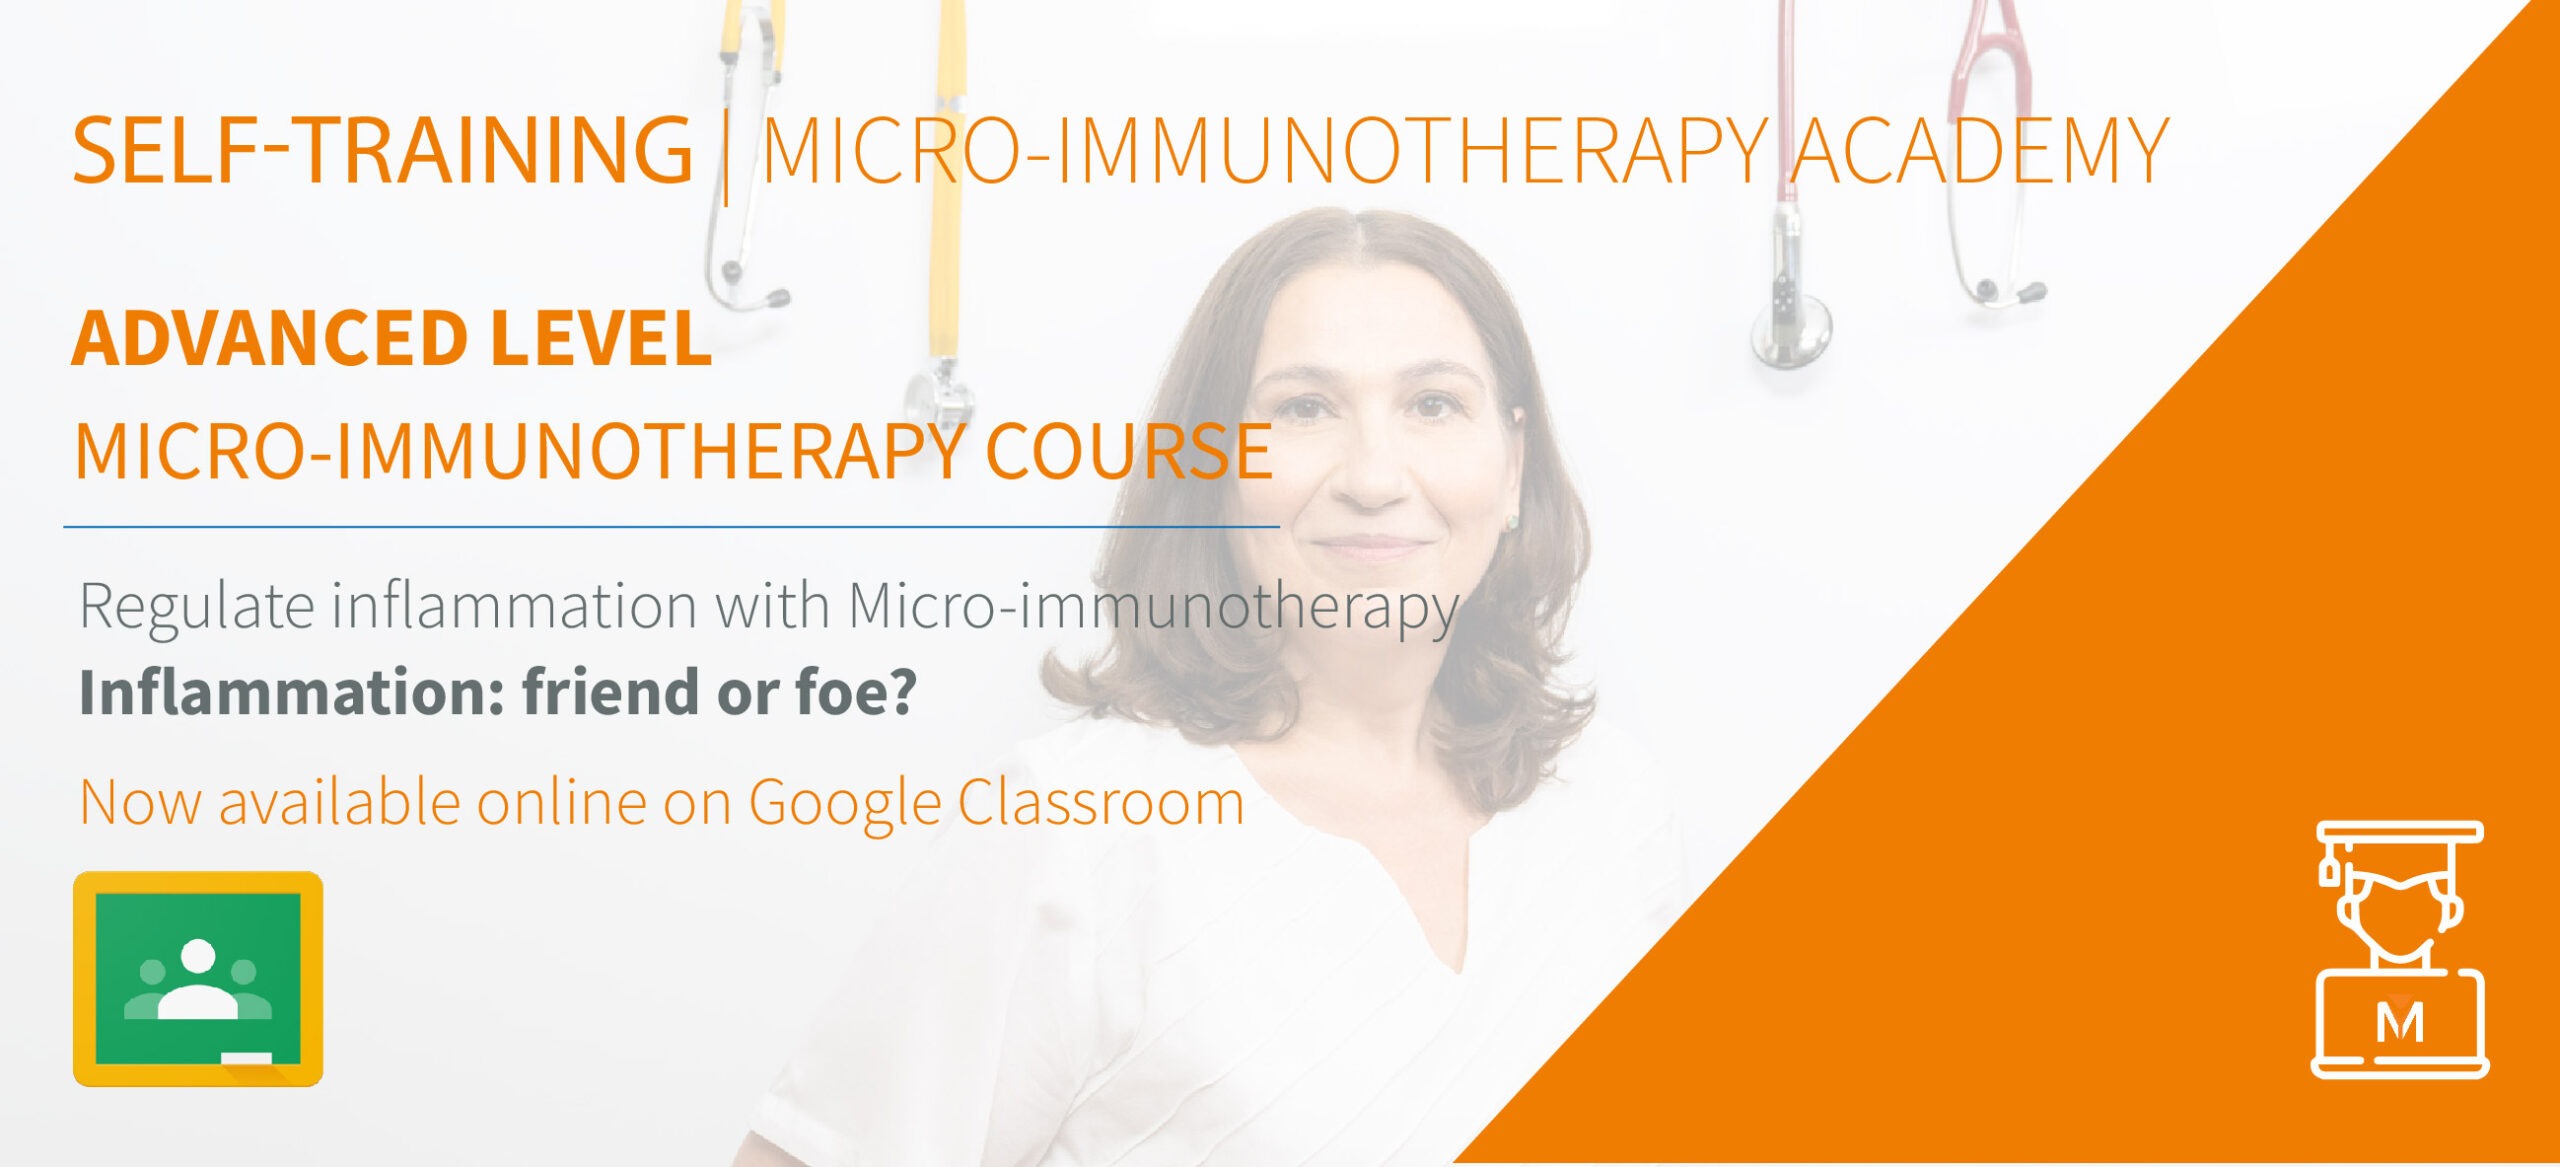 Self-training: Regulate inflammation with micro-immunotherapy